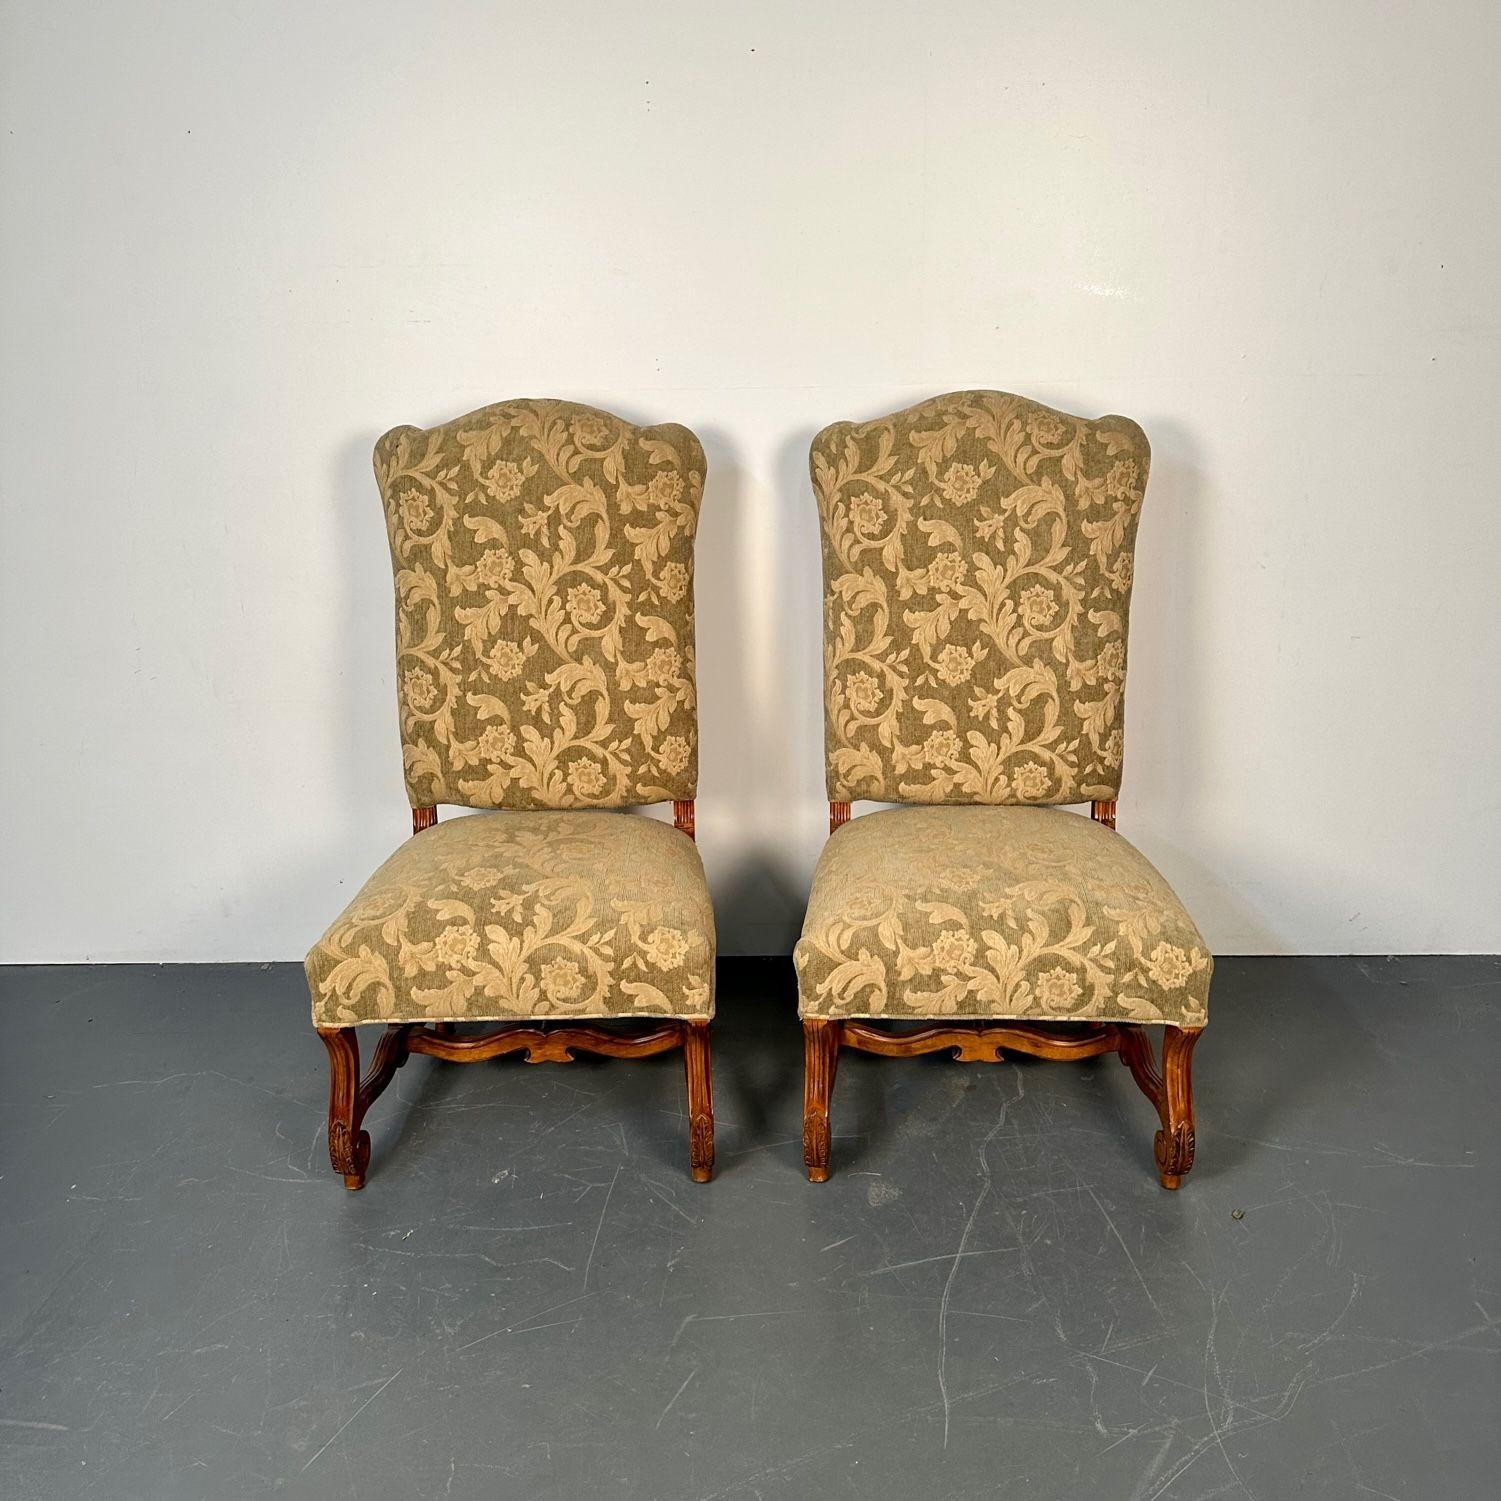 Pair of Jacobean Throne Chairs, King and Queen, Fine Fabric In Good Condition For Sale In Stamford, CT